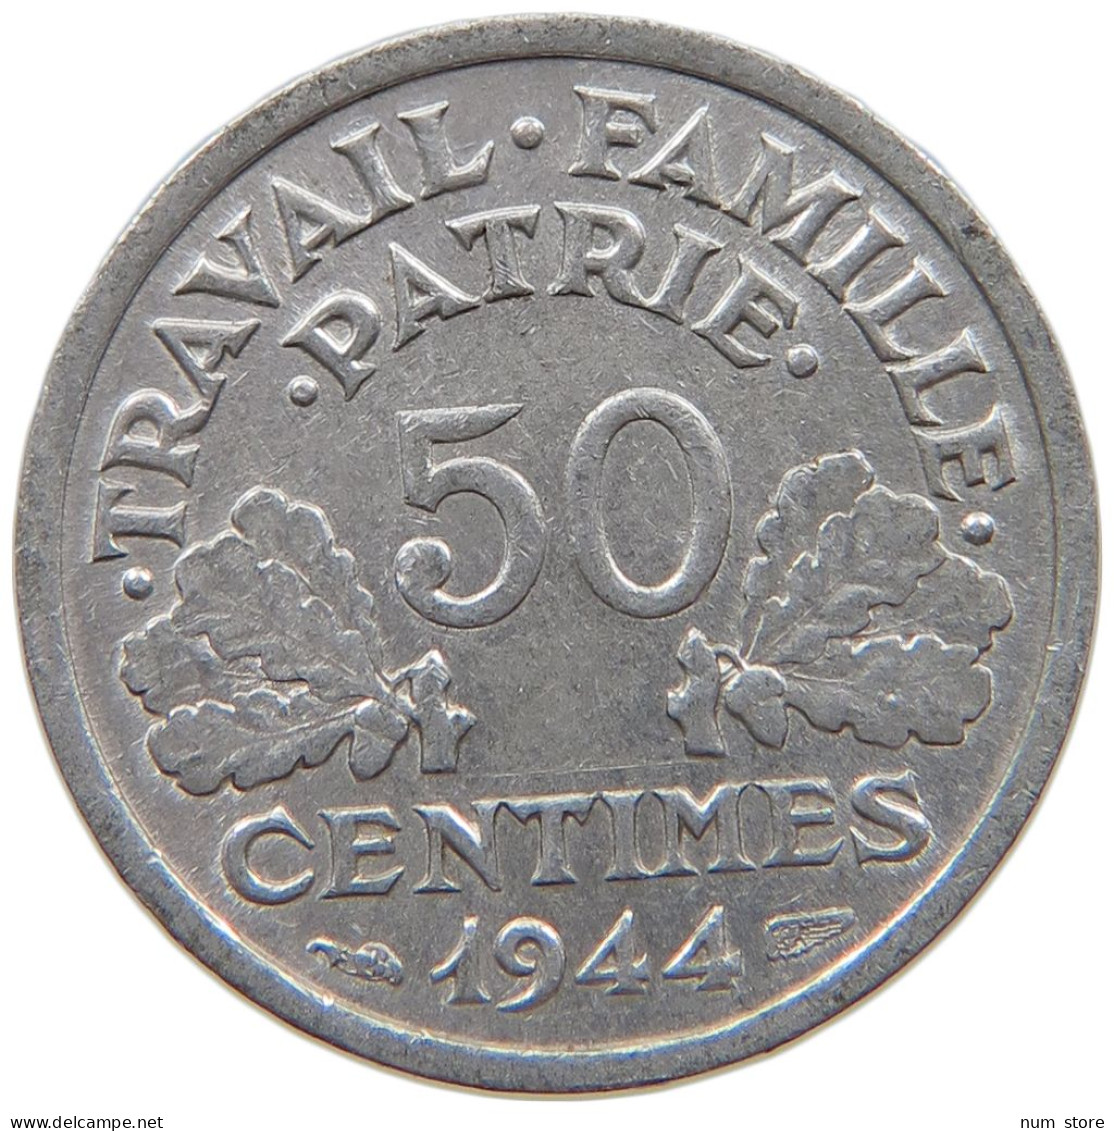 FRANCE 50 CENTIMES 1944 B #a060 0221 - 50 Centimes